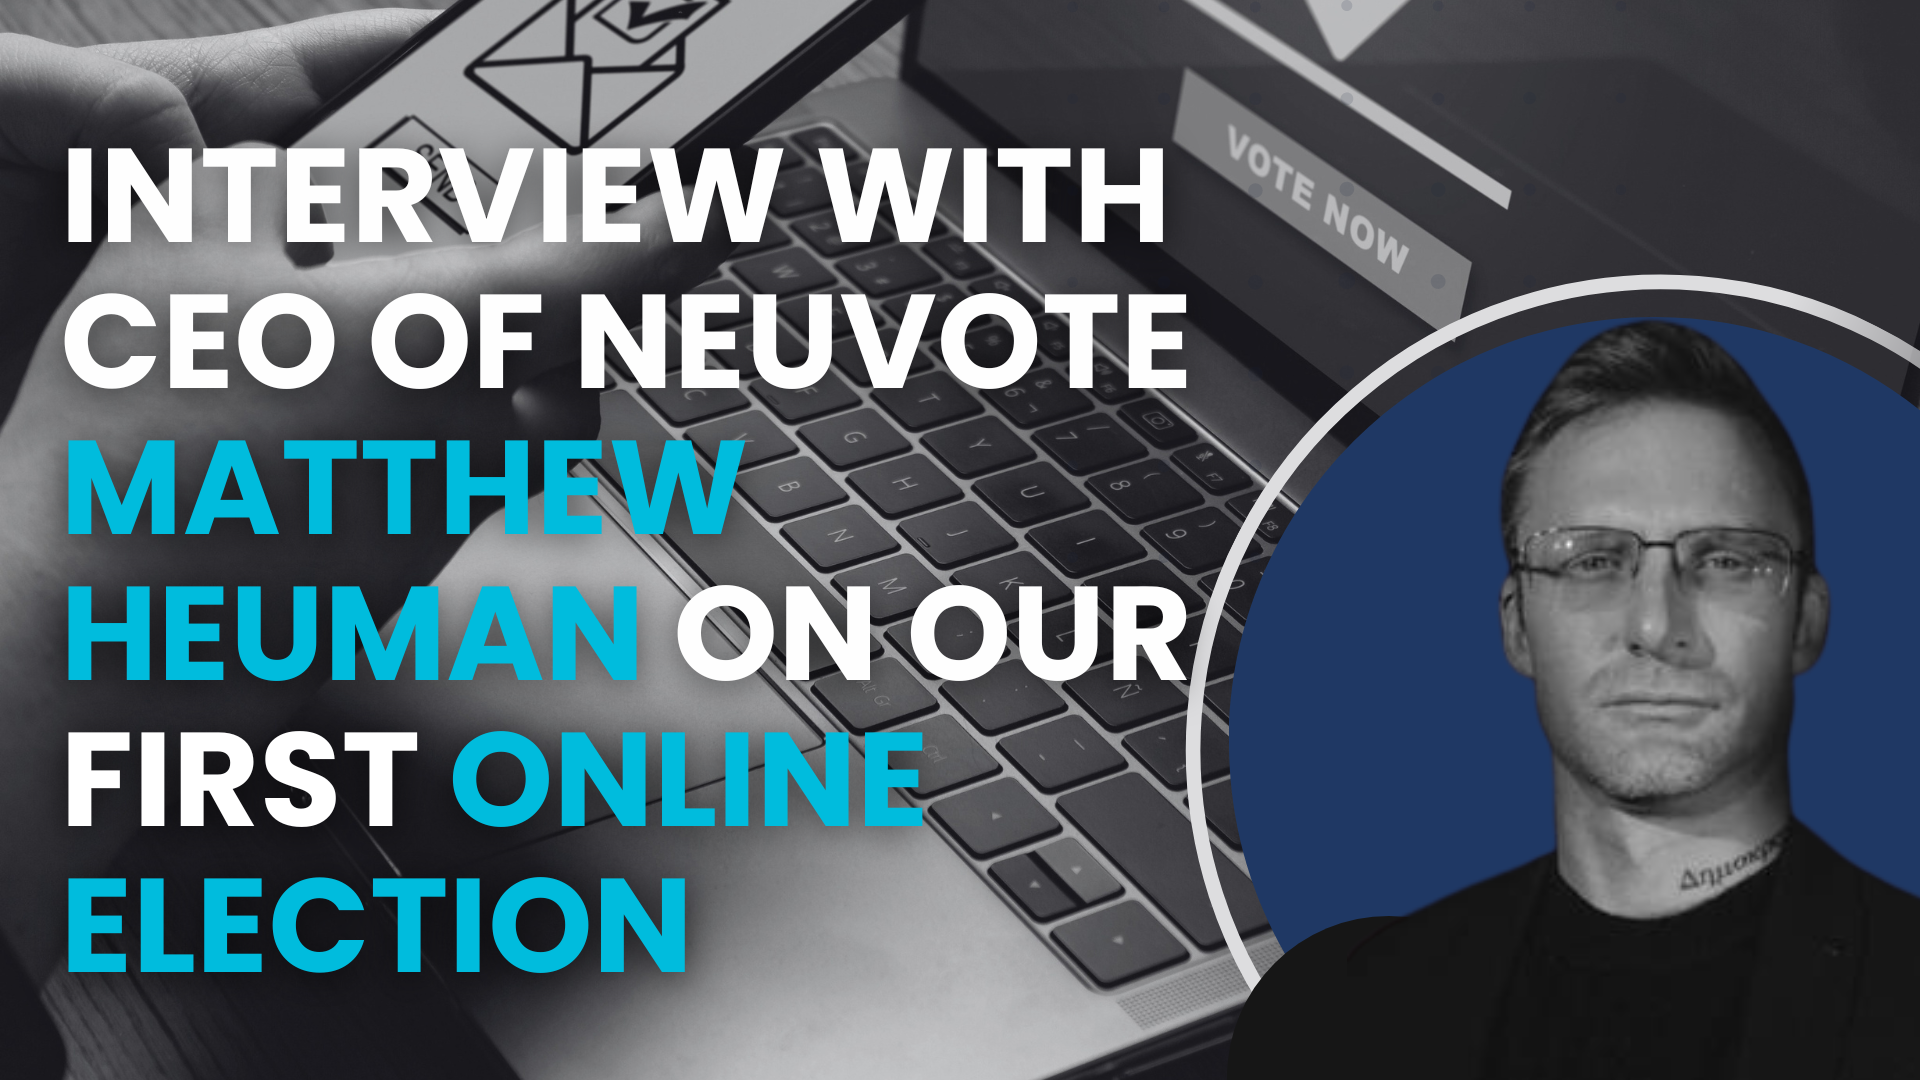 How successfully run your first online election: Interview with CEO of Neuvote Matthew Heuman